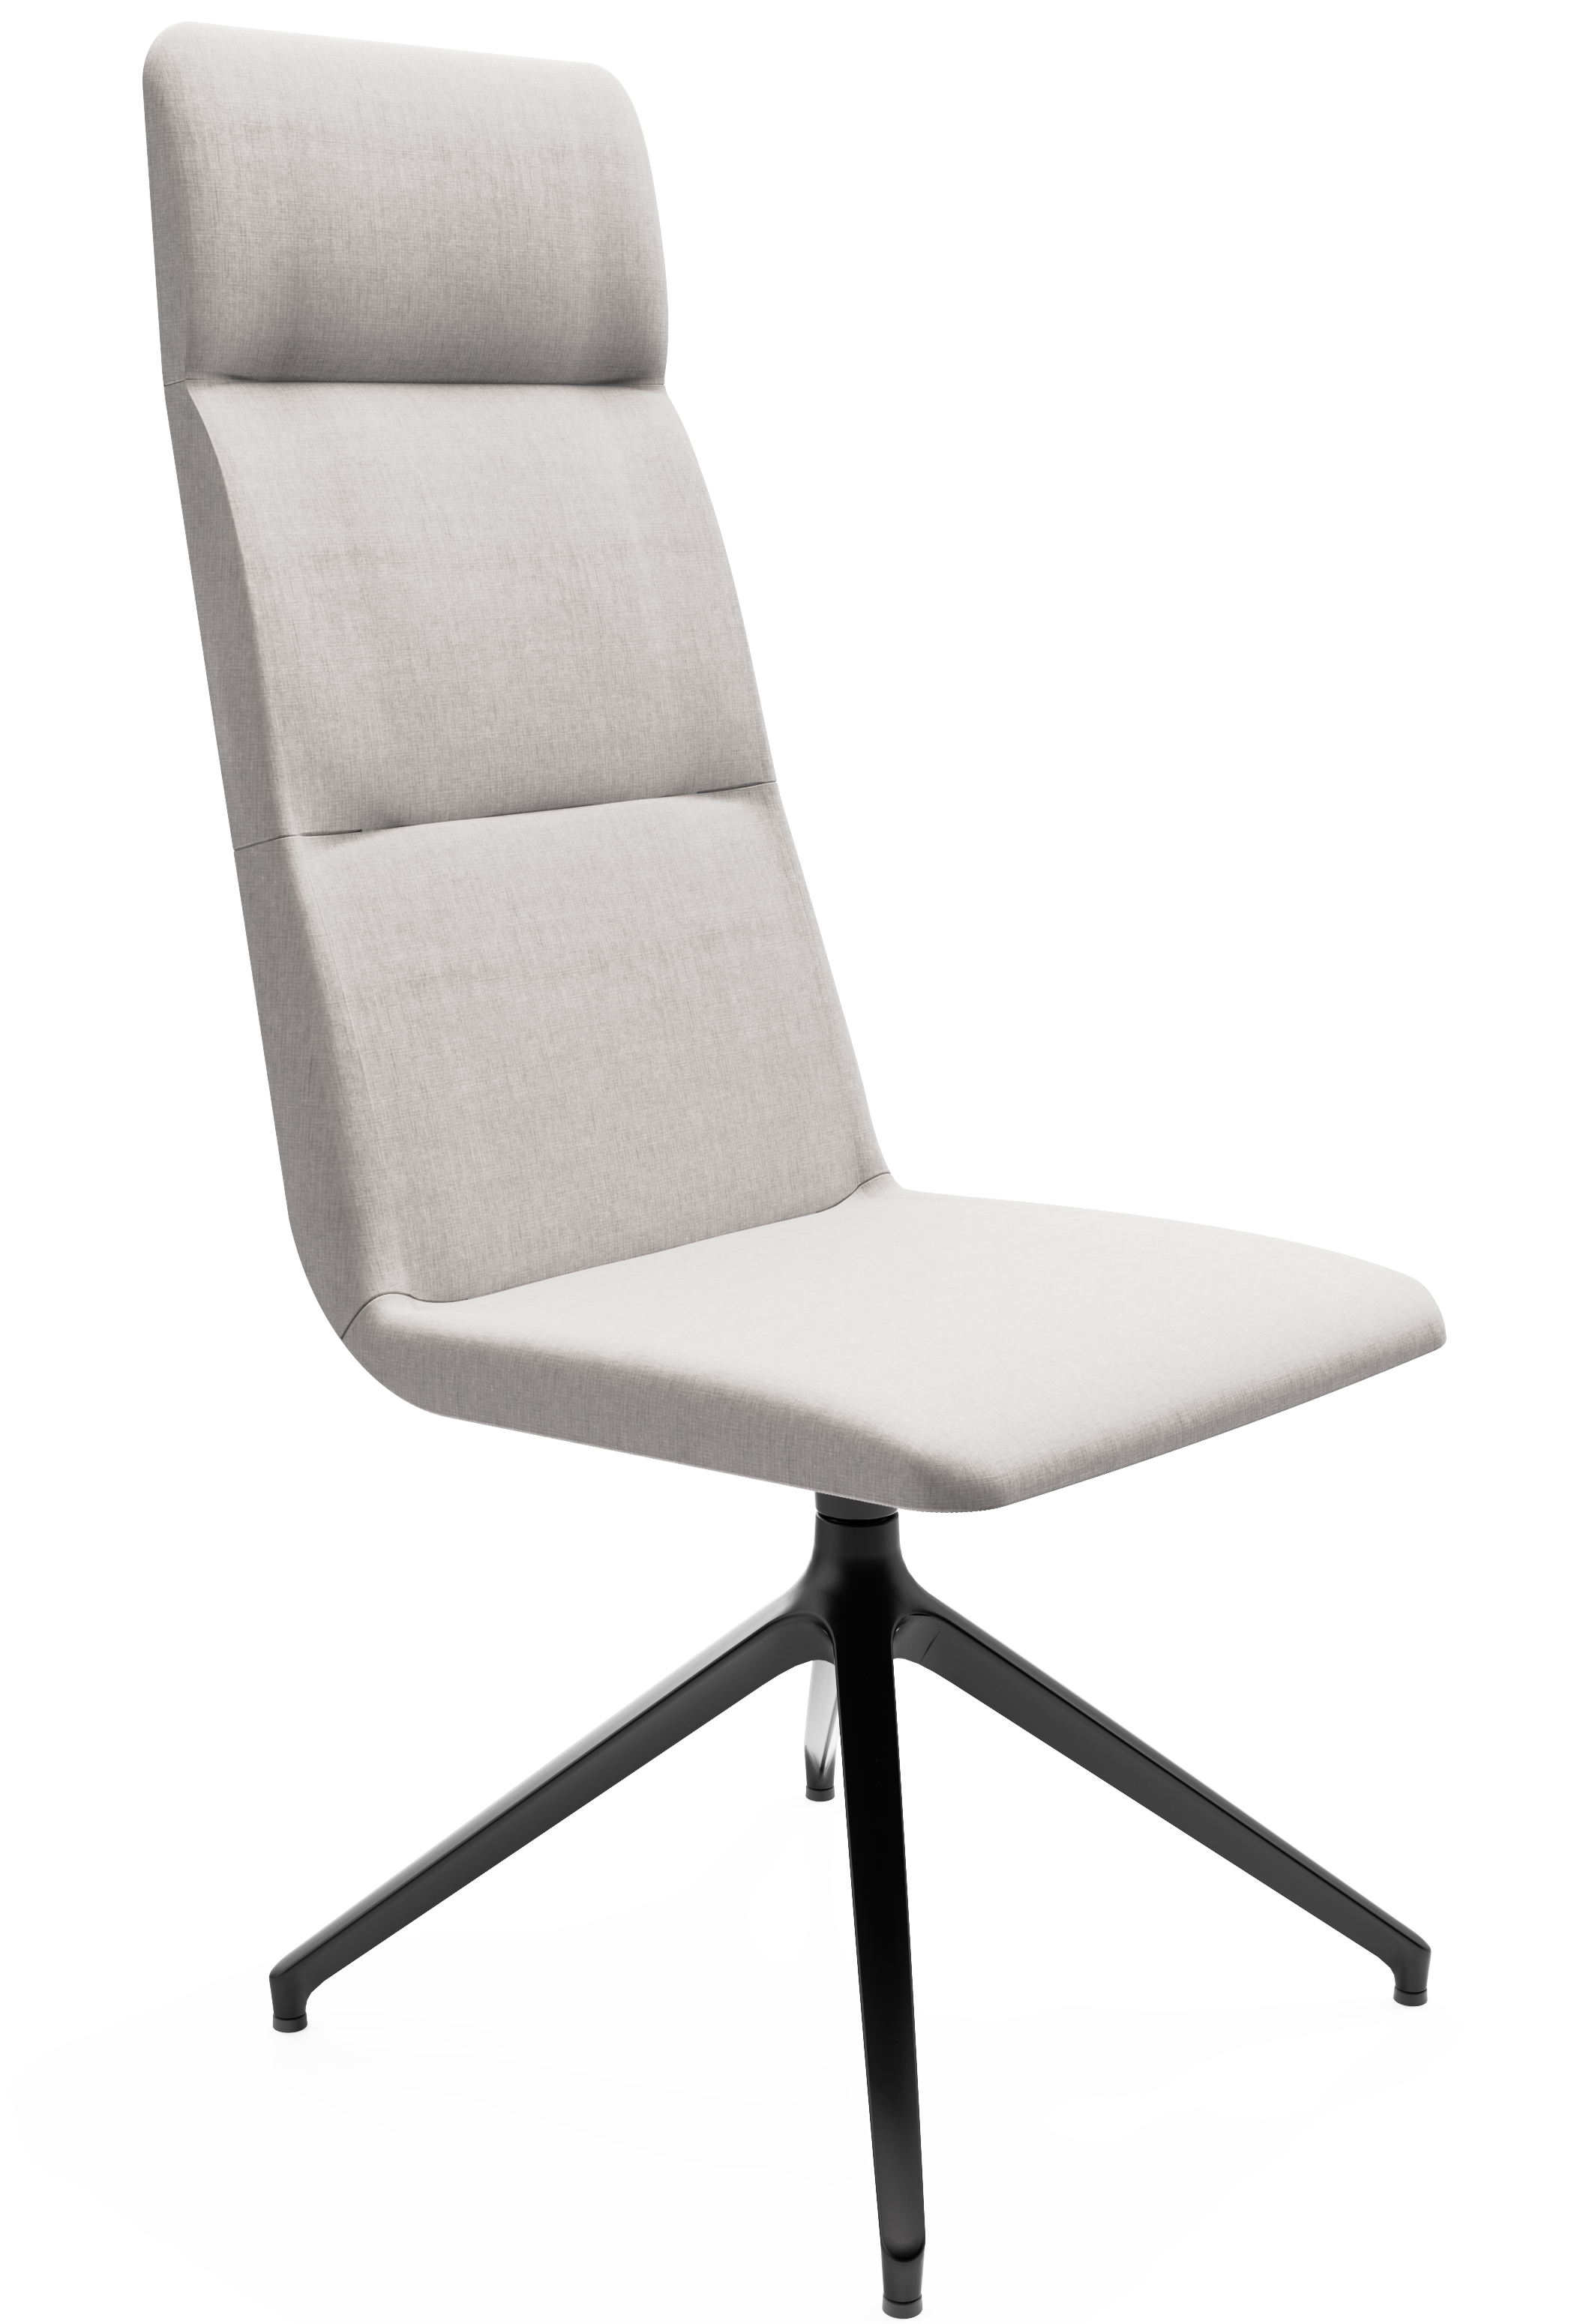 WS - Accord high 4 star base chair - black - remix 126 - front angle